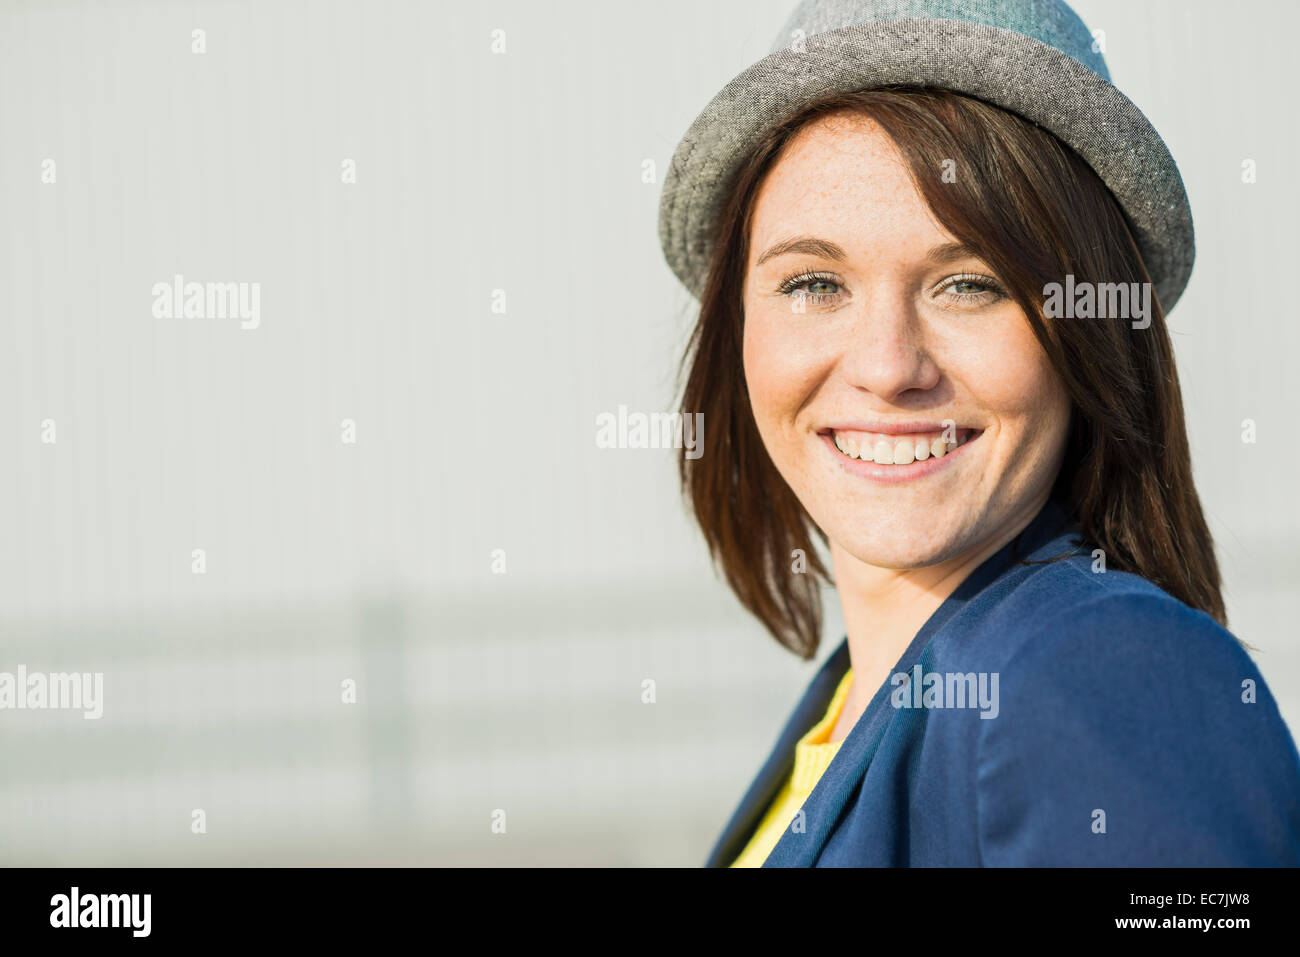 Portrait of smiling young woman wearing hat Stock Photo